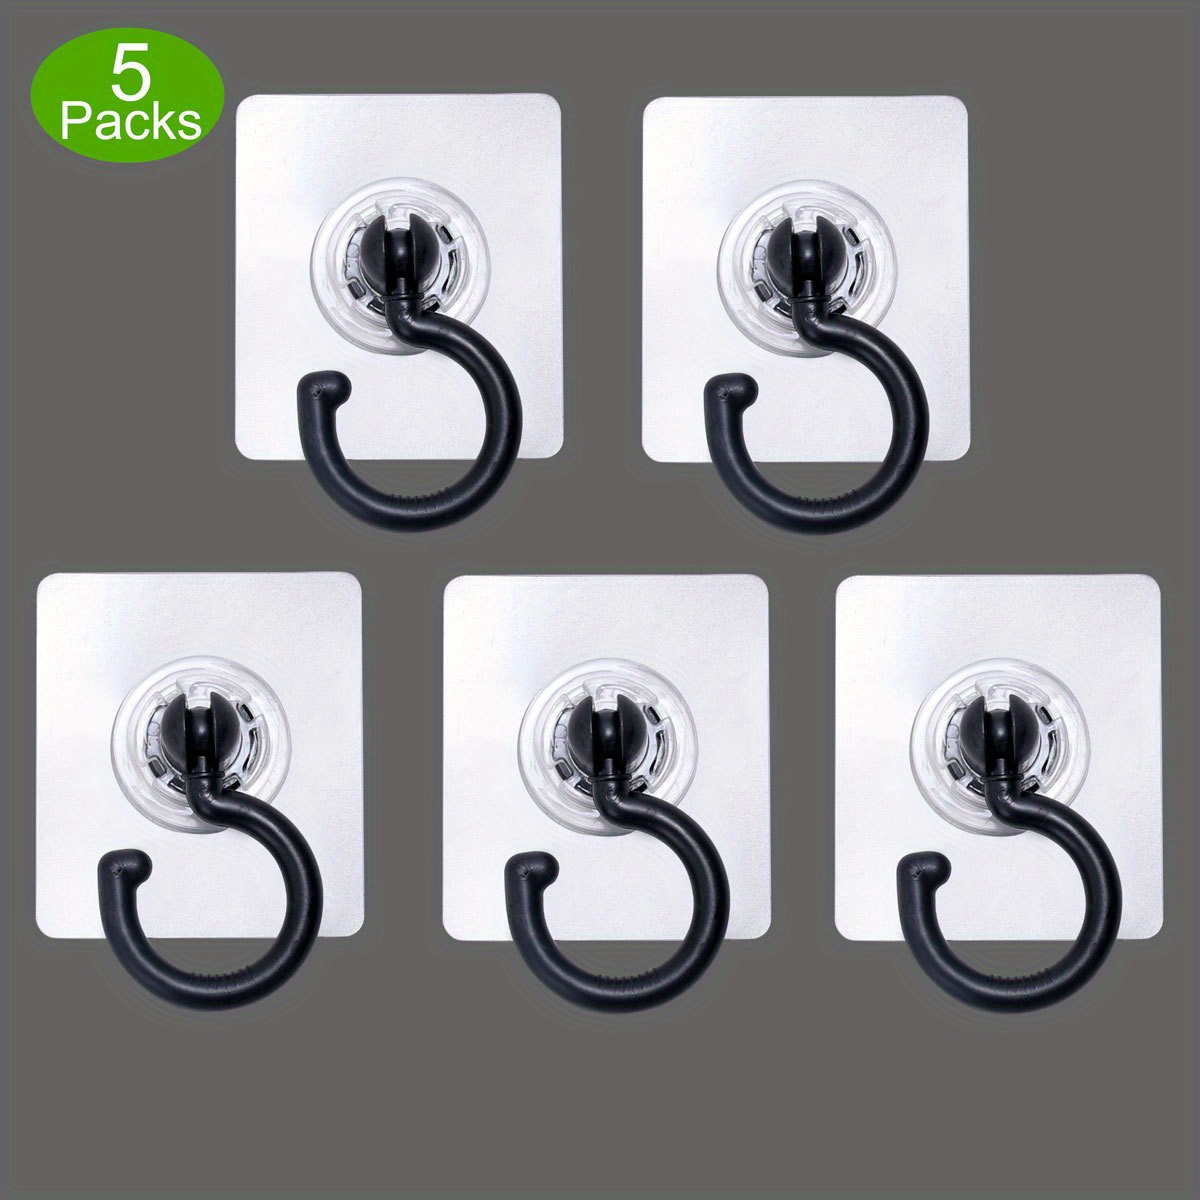 1pc Ceiling Hooks For Hanging Plants Plant Bracket Iron Wall Mount Lanterns  Hangers For Hanging Bird Feeders Lanterns Wind Chimes Planters Anti  Decouplingplant Suspension Safety Design Outdoor Decoration Hooks -  Business, Industry